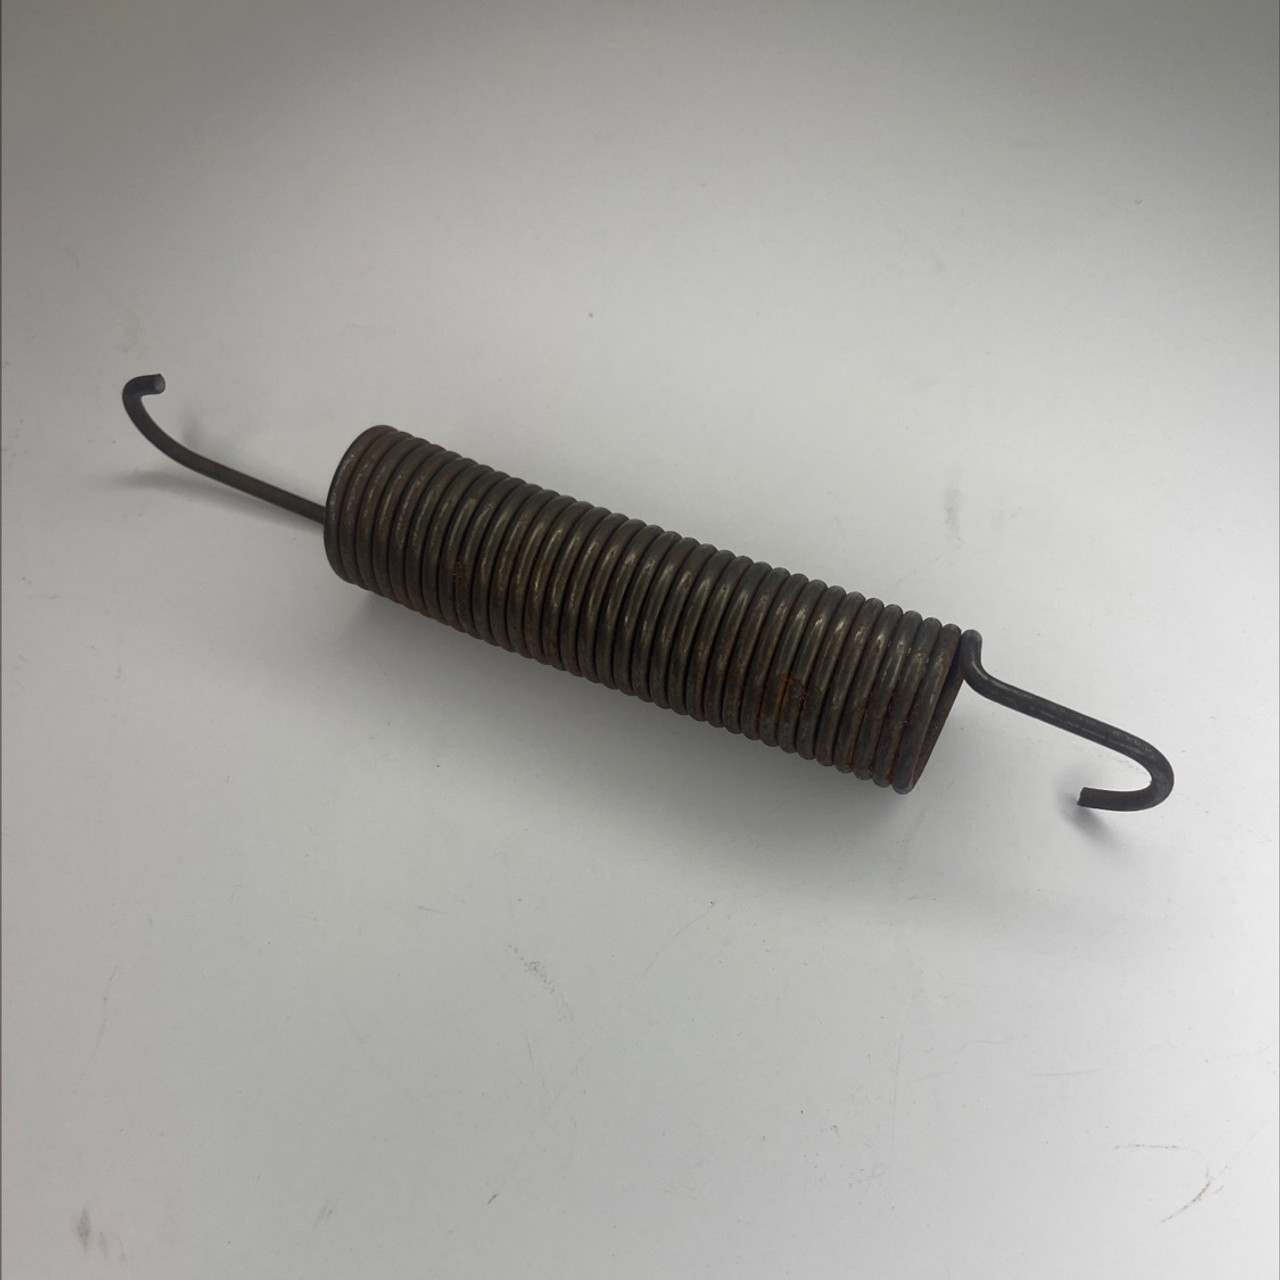 Trunk lid spring
FIAT 124 Sport Coupe - 1967-1972

Fits AC and BC Coupes
- Auto Ricambi
4163315